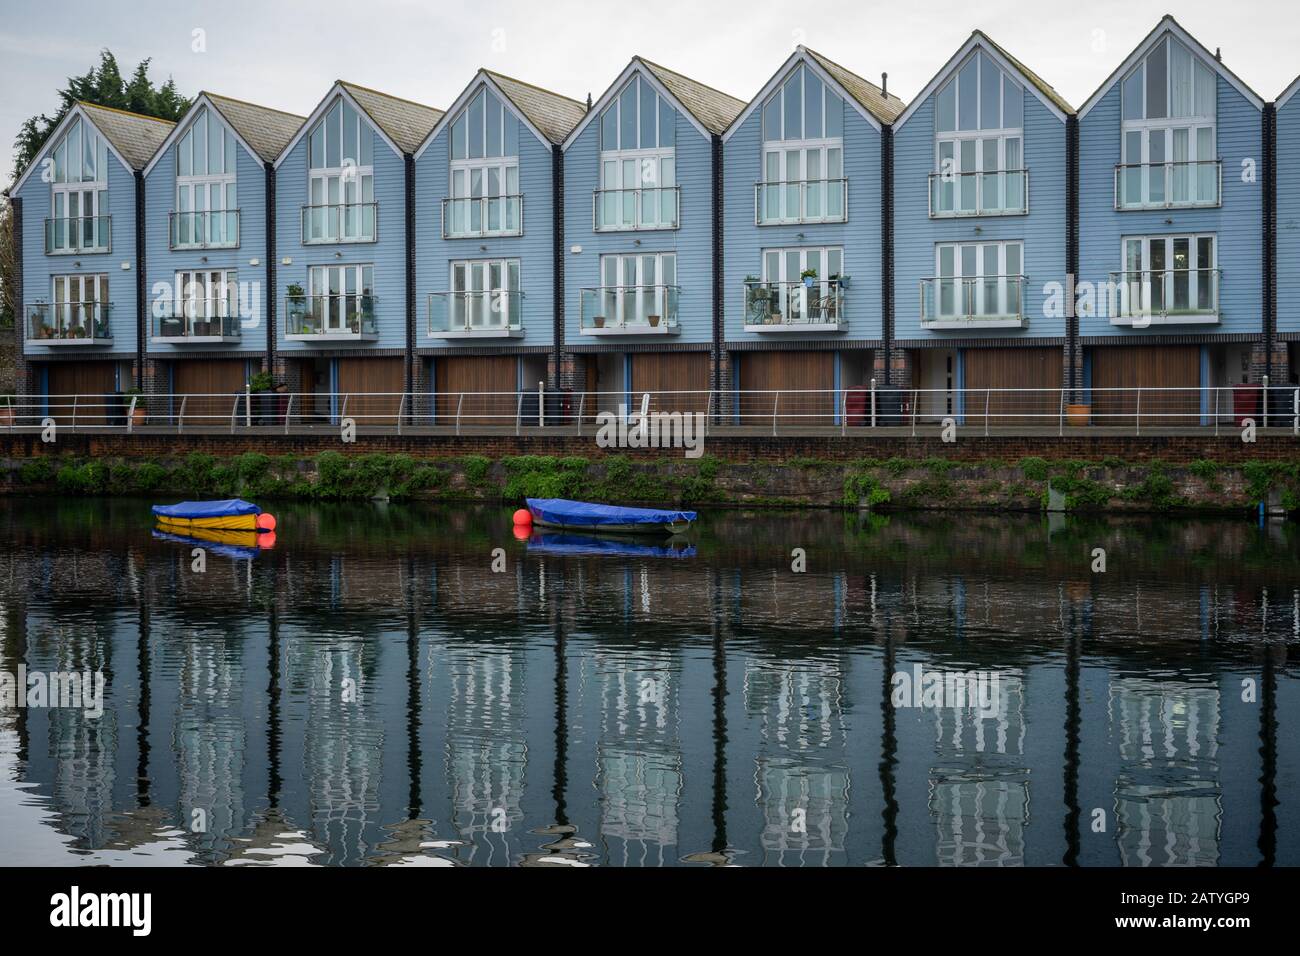 A row of modern townhouses overlooking a river reflecting on the water Chichester canal, west Sussex UK Stock Photo